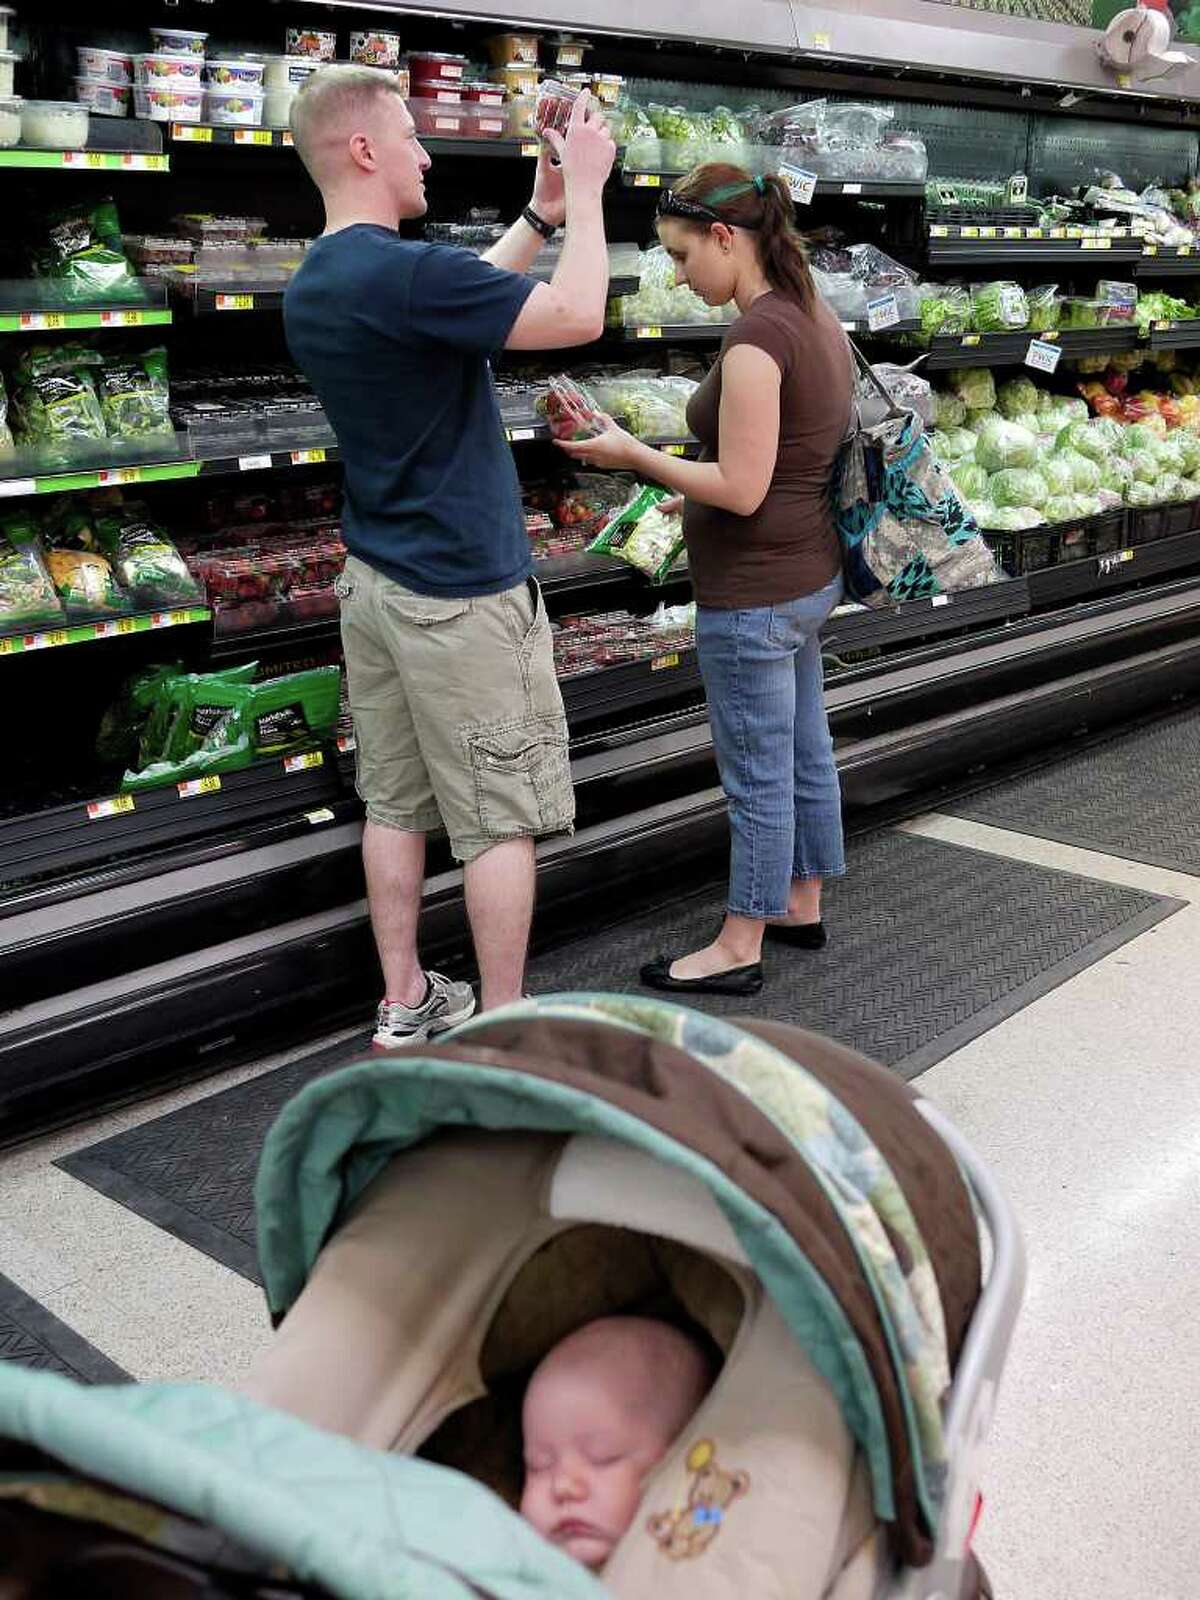 Sgt. 1st. Class Jeremy Ricketts, of Harrison, Arkansas, shops with his wife, Samantha, and son, Landen, 3-months-old, in Killeen, Texas, Saturday, March 24, 2012. Ricketts suffered brain injury in Iraq in October of 2011. Shopping was a difficult task for Ricketts, but with help from the brain injury treatment center at Fort Hood and his wife, he was able to recover.